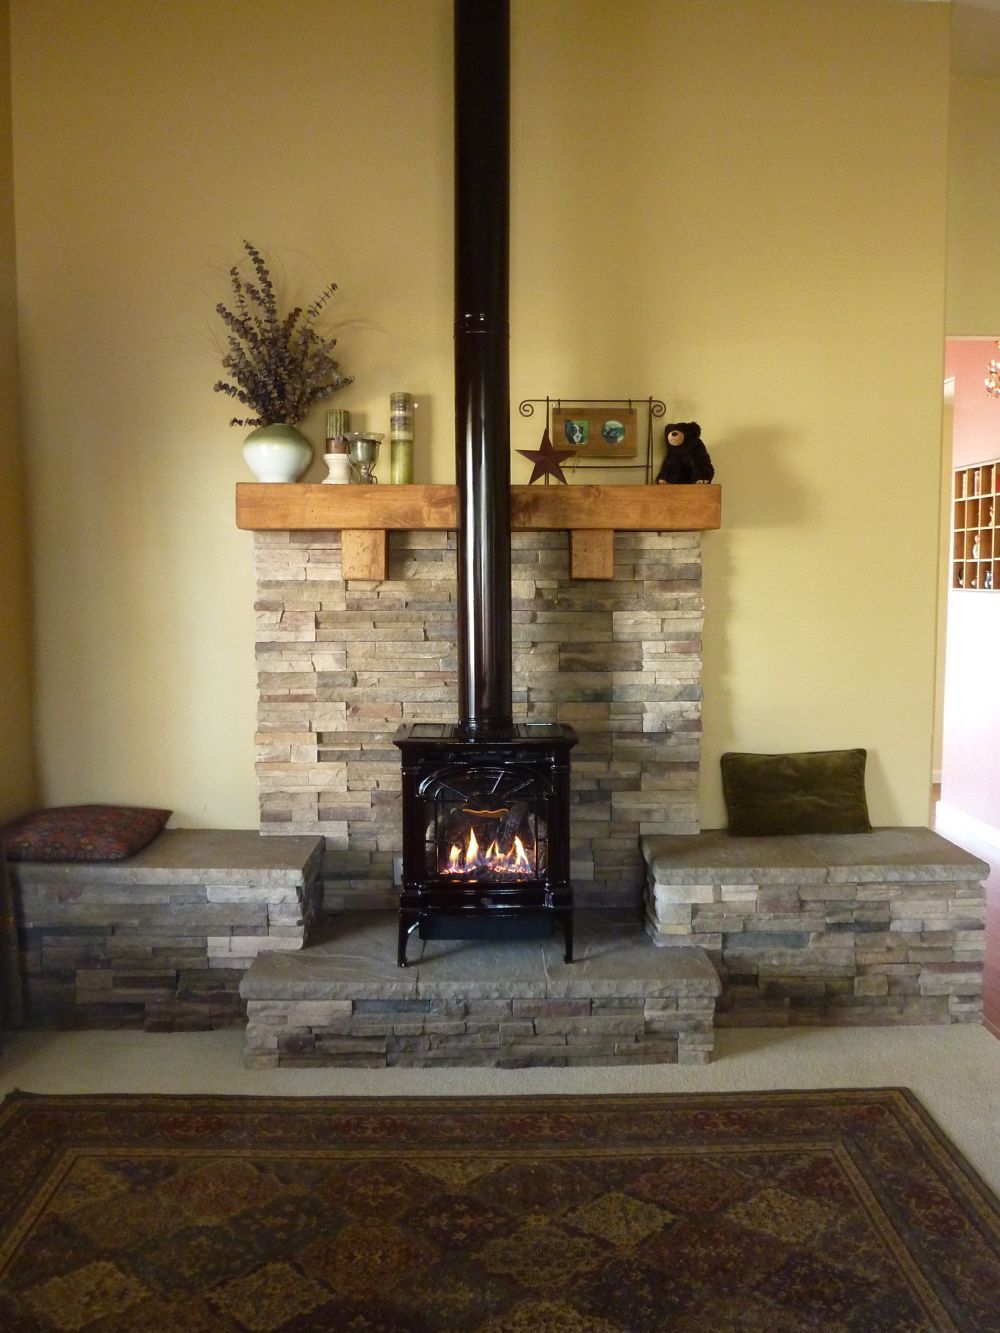 Corner Propane Fireplace New Propane Fireplace We Had This Hearth Built to Give More